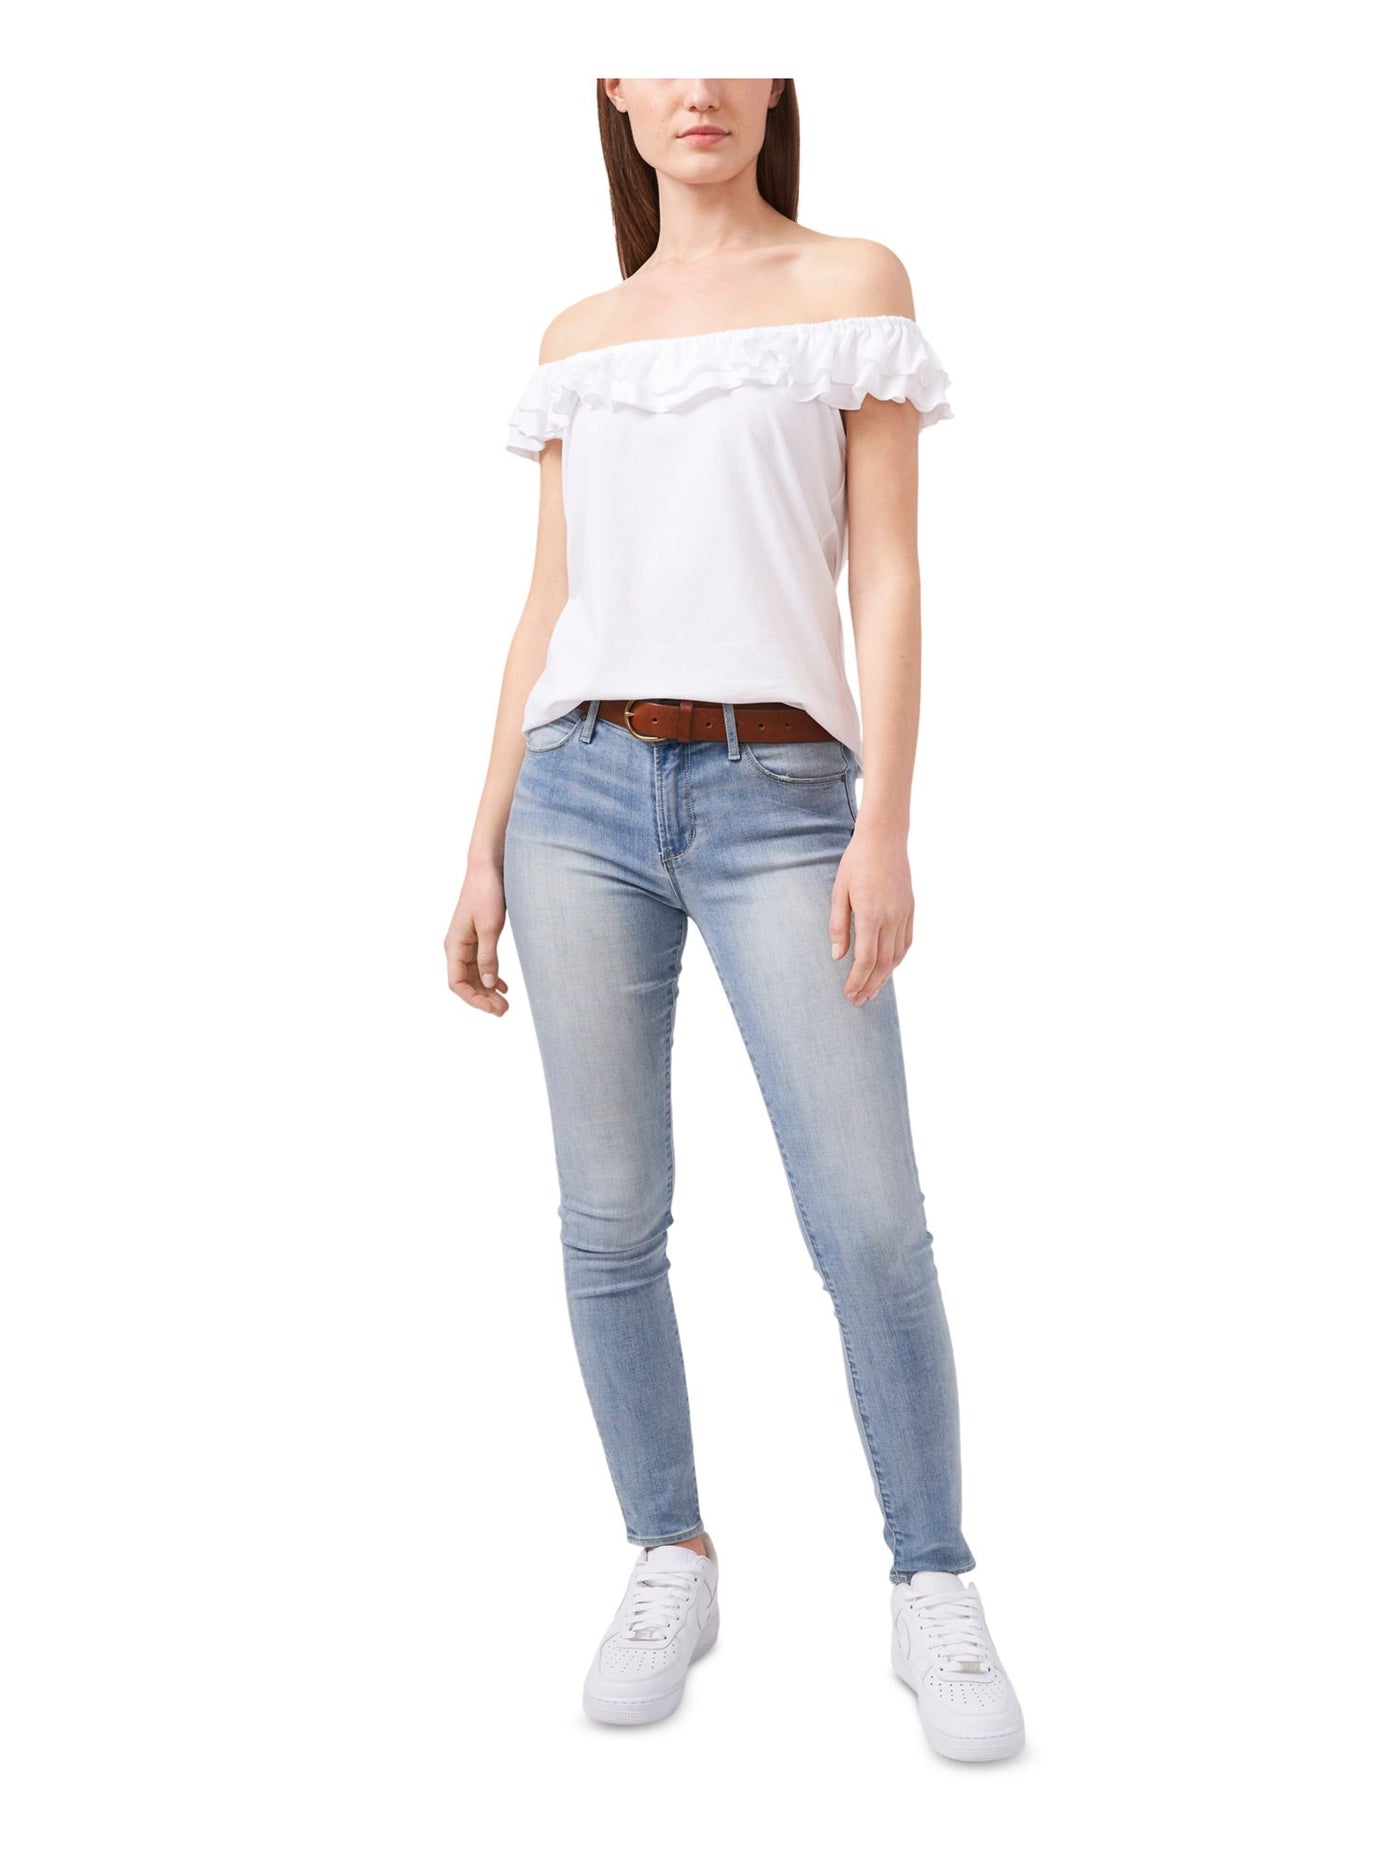 RILEY&RAE Womens White Off Shoulder Top 2X